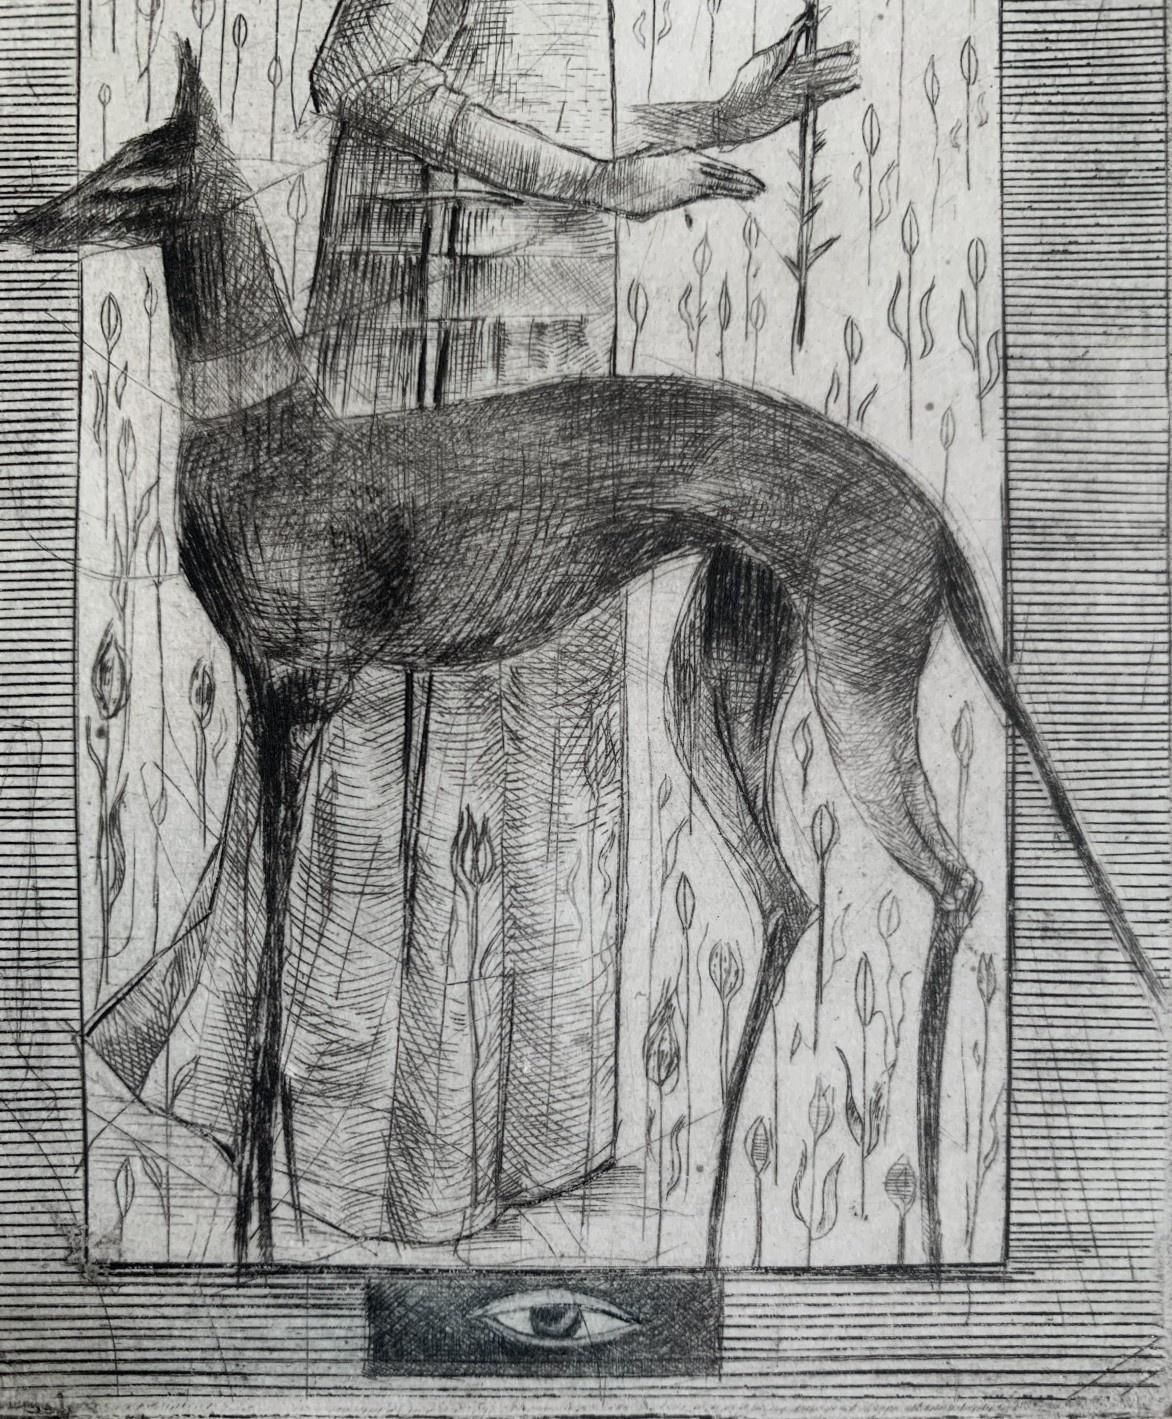 Contemporay figurative mezzotint and drypoint print by Polish artist Ewa Kutylak. Print depicts a human standing with a dog. Proportions of the composition are elongated. The character is facing right side while dog i sfacing left side.

EWA KUTYLAK